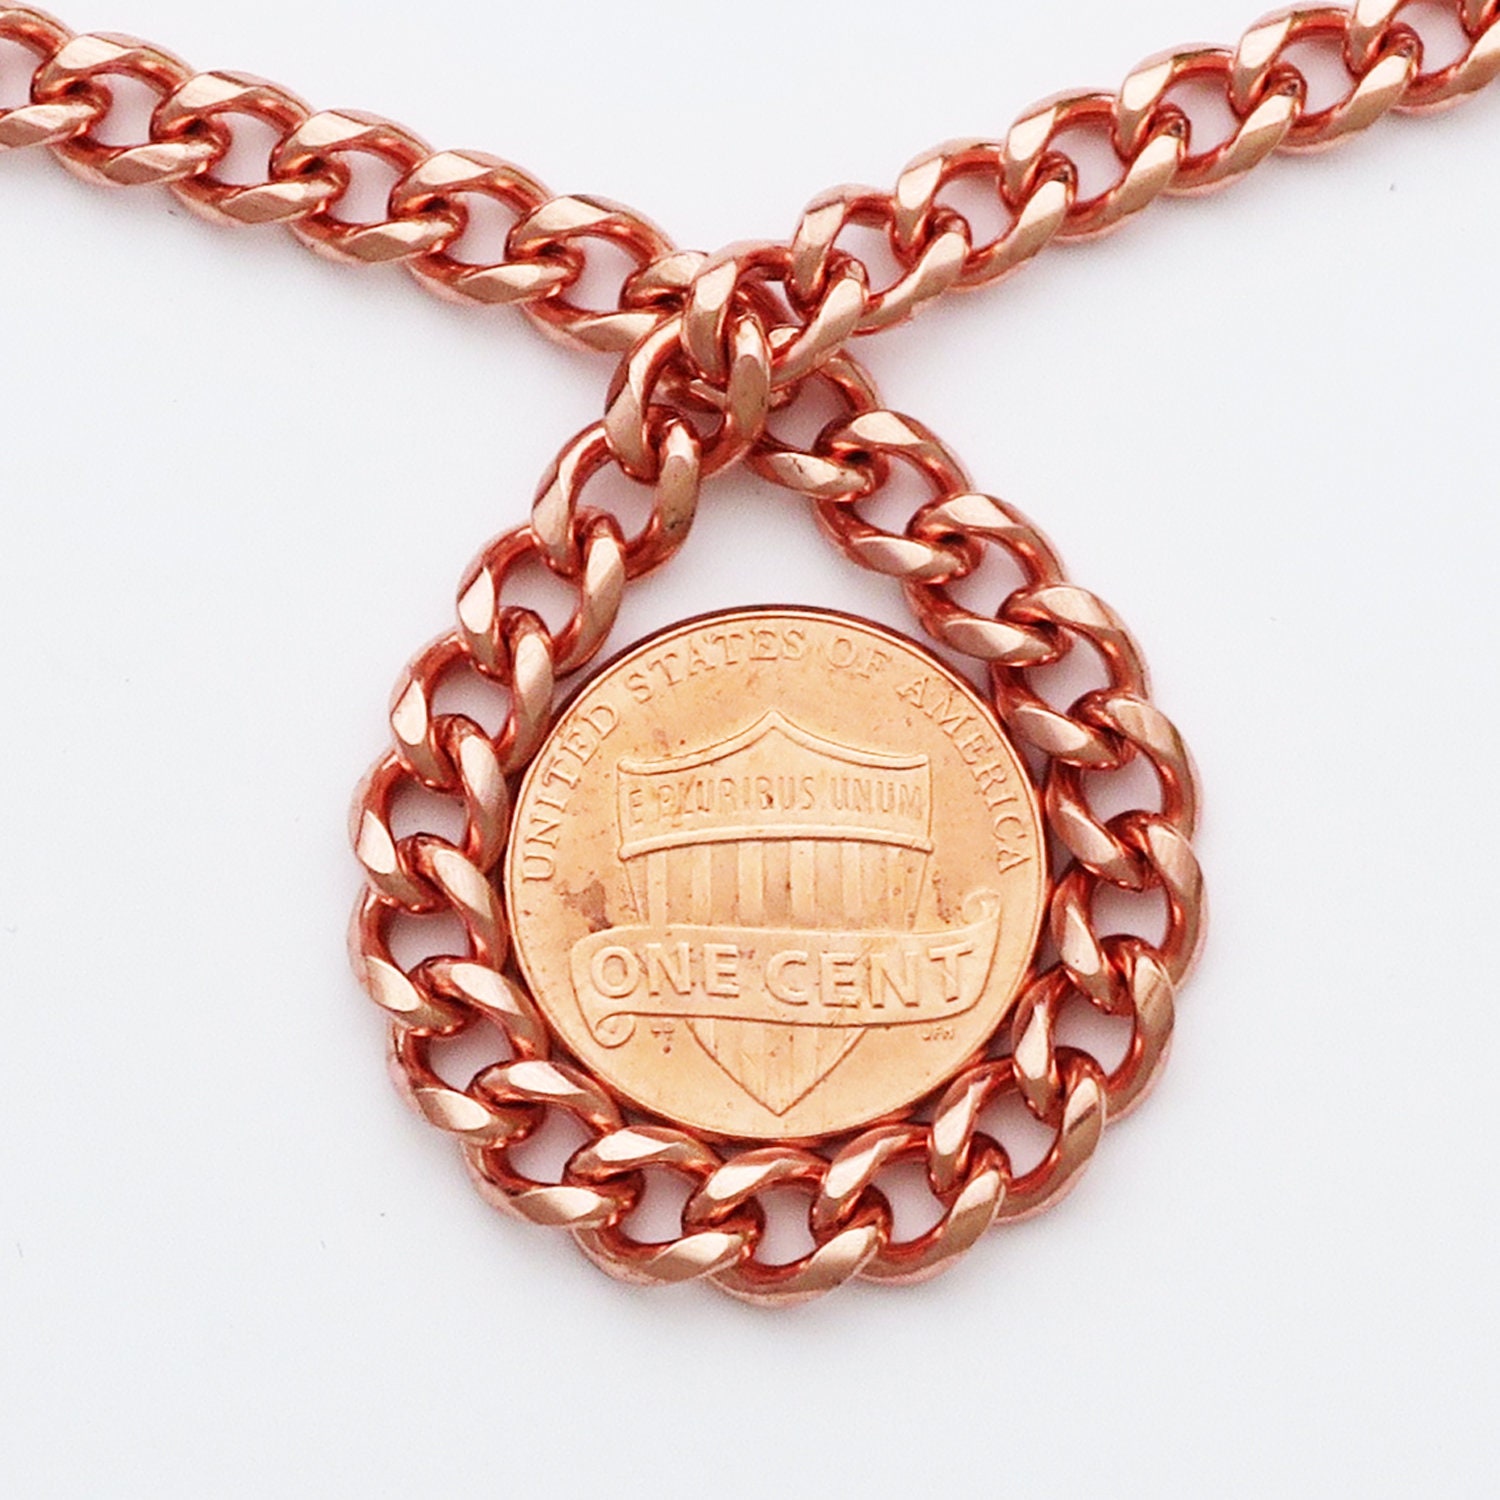 18 inch Length Solid Copper Chain CN727G - 3/16 of An inch Wide